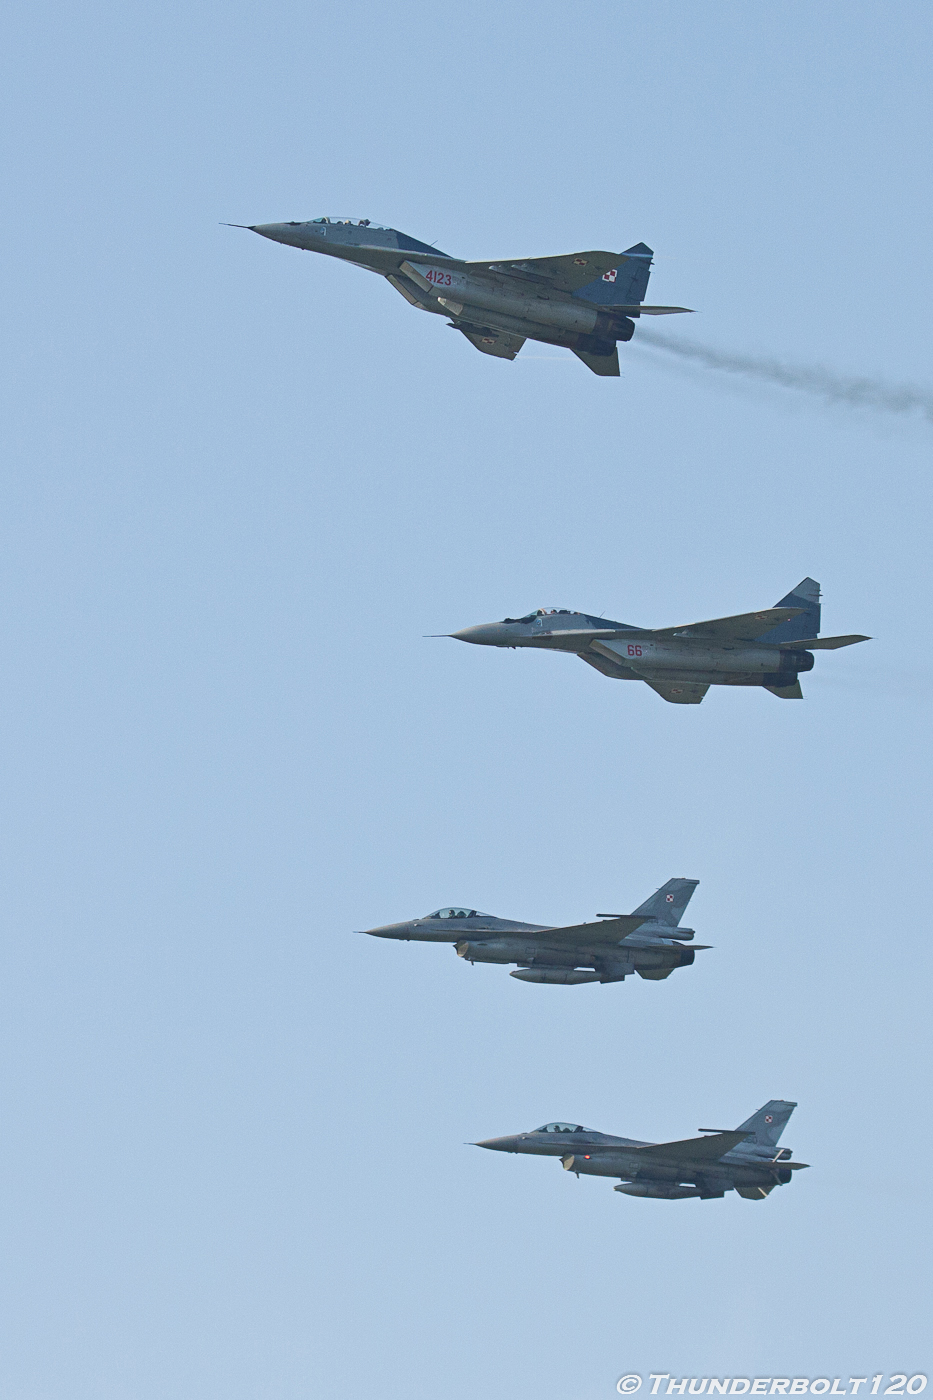 2x Mig-29 and 2x F-16